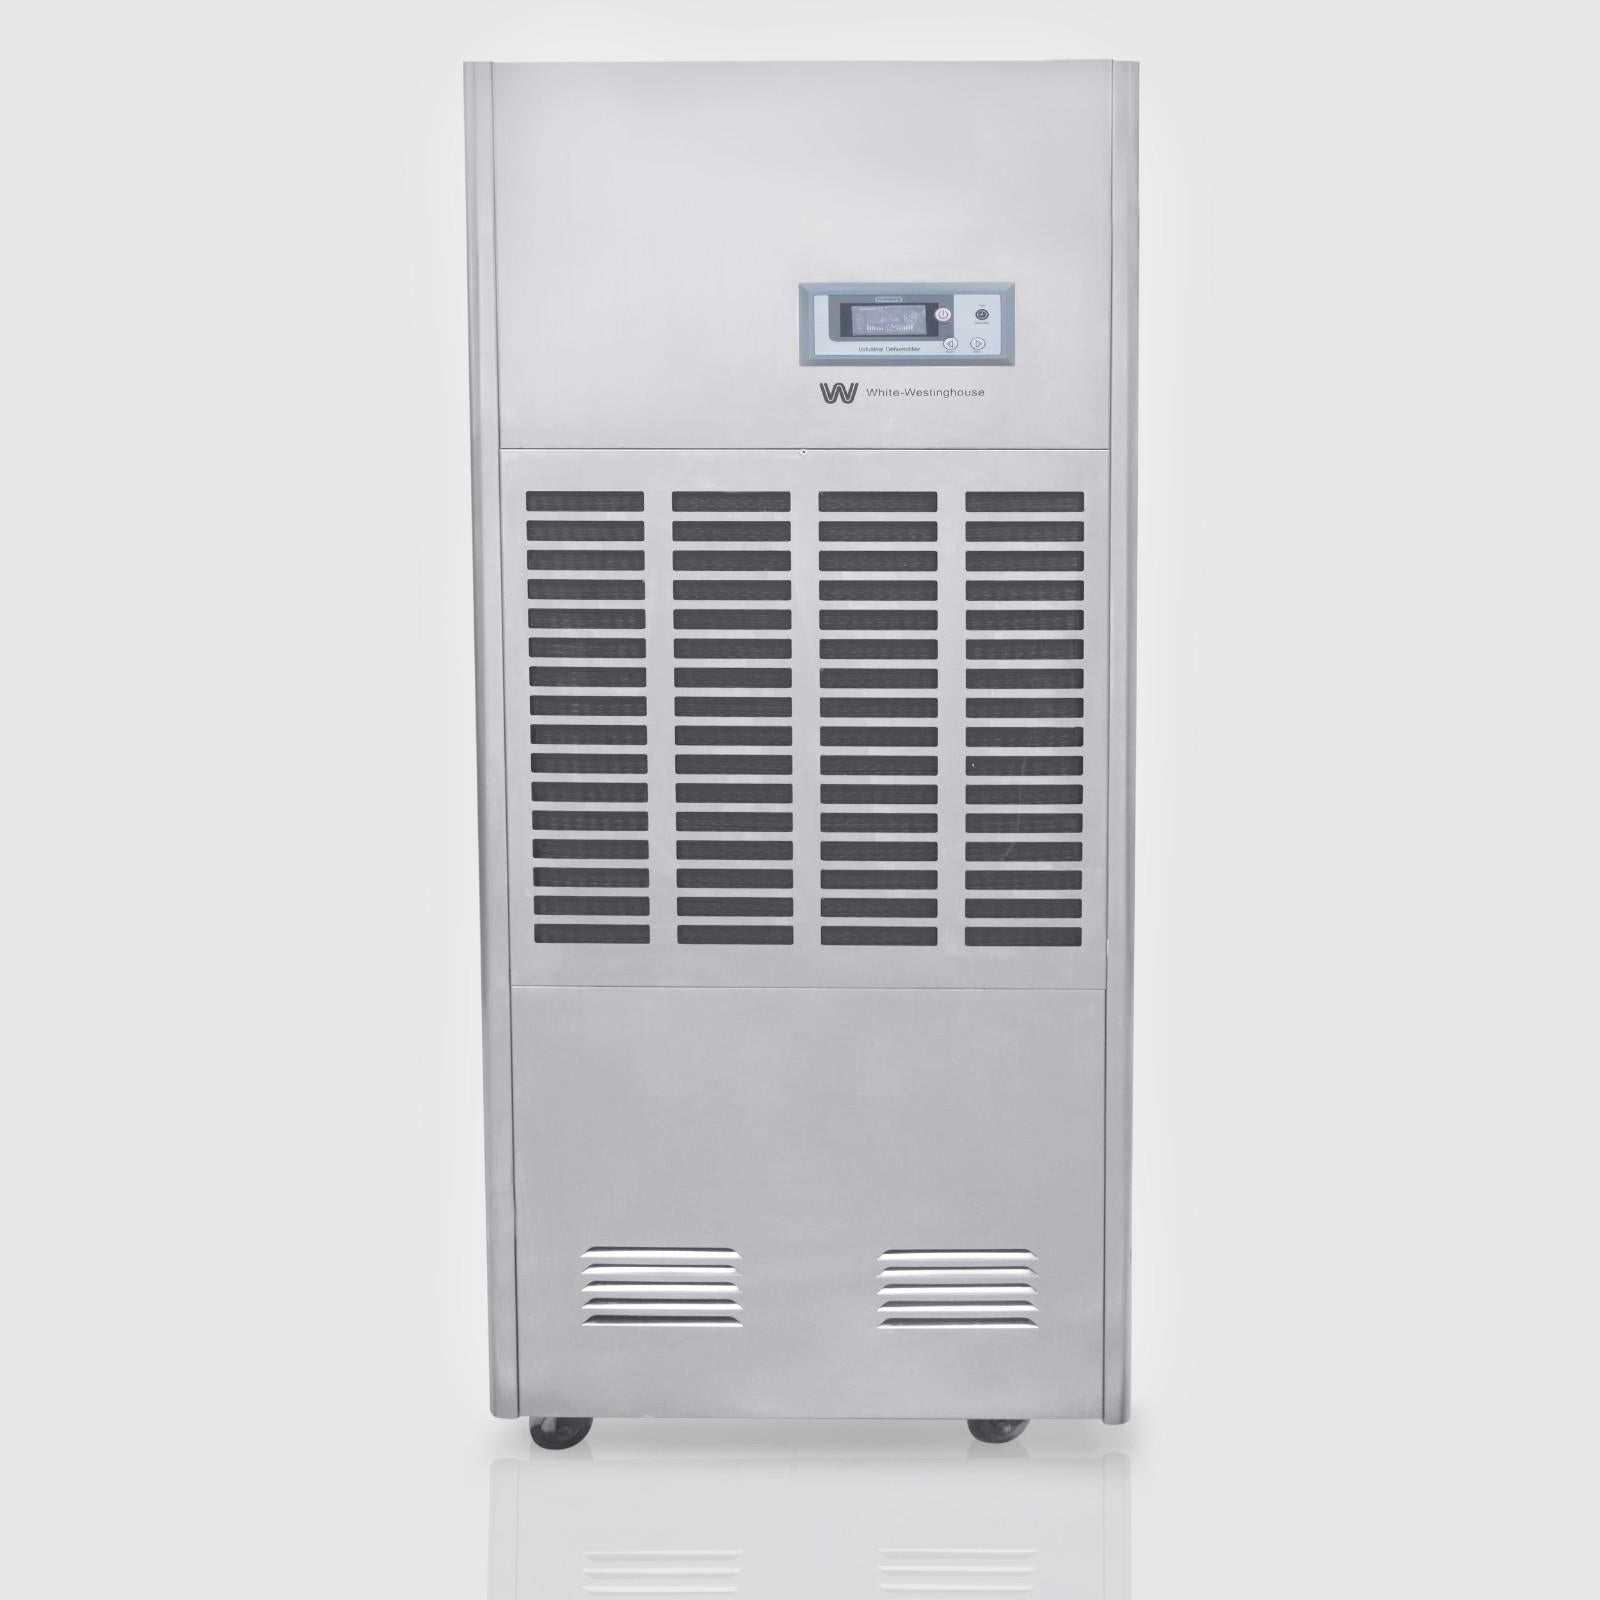 ALT Text:  White Westinghouse Industrial Dehumidifier WDE360S with a sleek metal body and front air vents. Features a digital control panel, universal wheels, and a robust design for industrial use. Ideal for spaces up to 240m², capable of removing 168 liters of moisture per day, and includes automatic defrost, adjustable humidity settings, and continuous drainage options. Perfect for maintaining optimal humidity in large commercial environments.